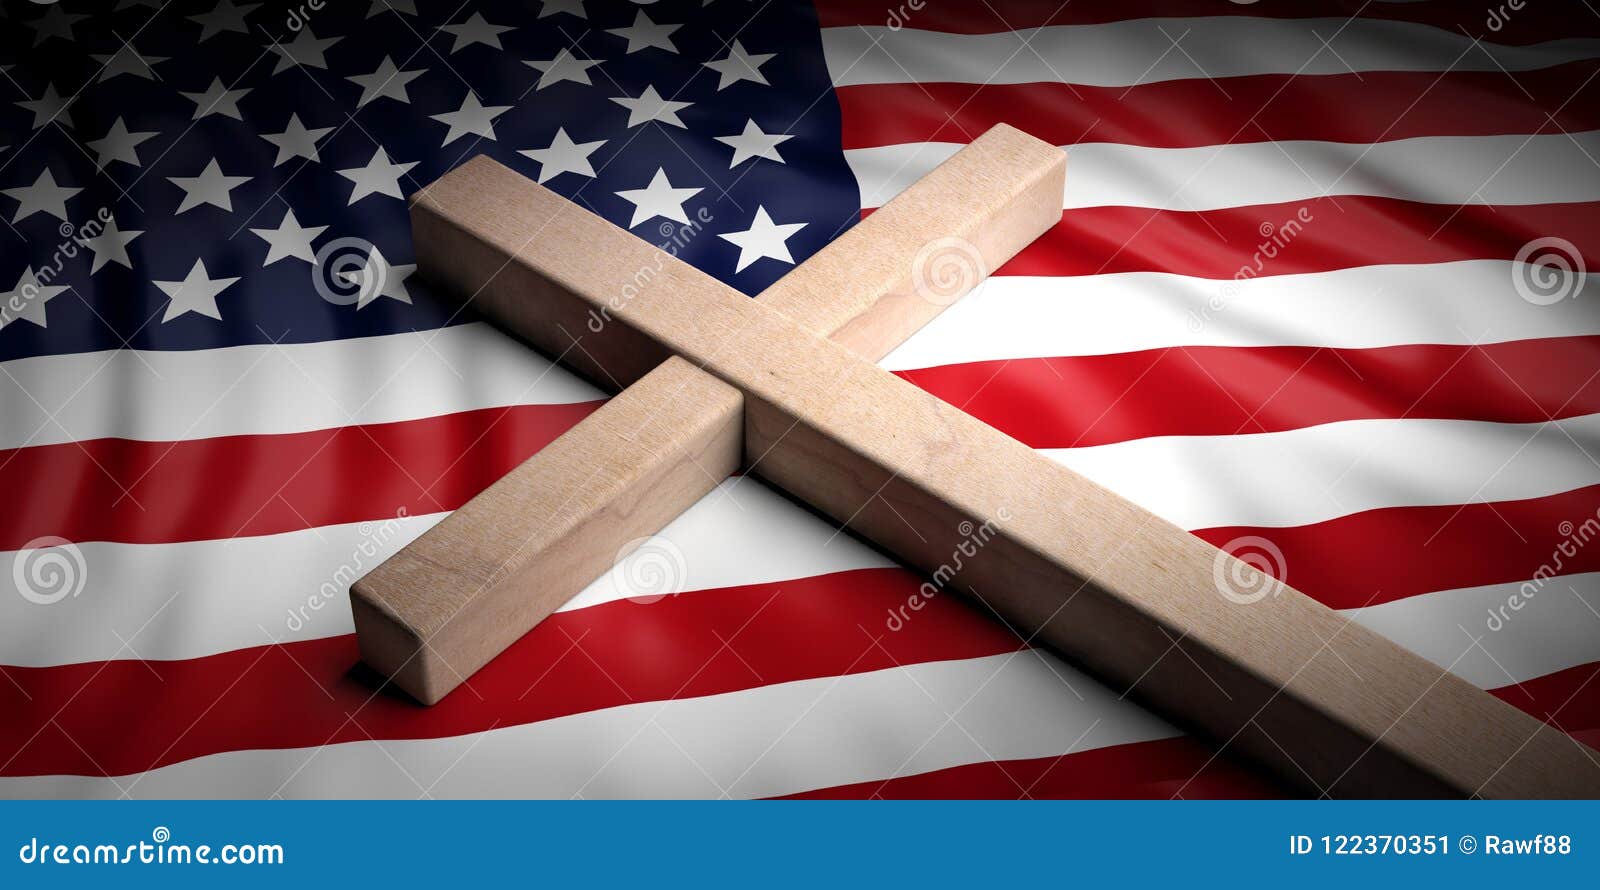 Download Christian Cross On American Flag Background. 3d ...